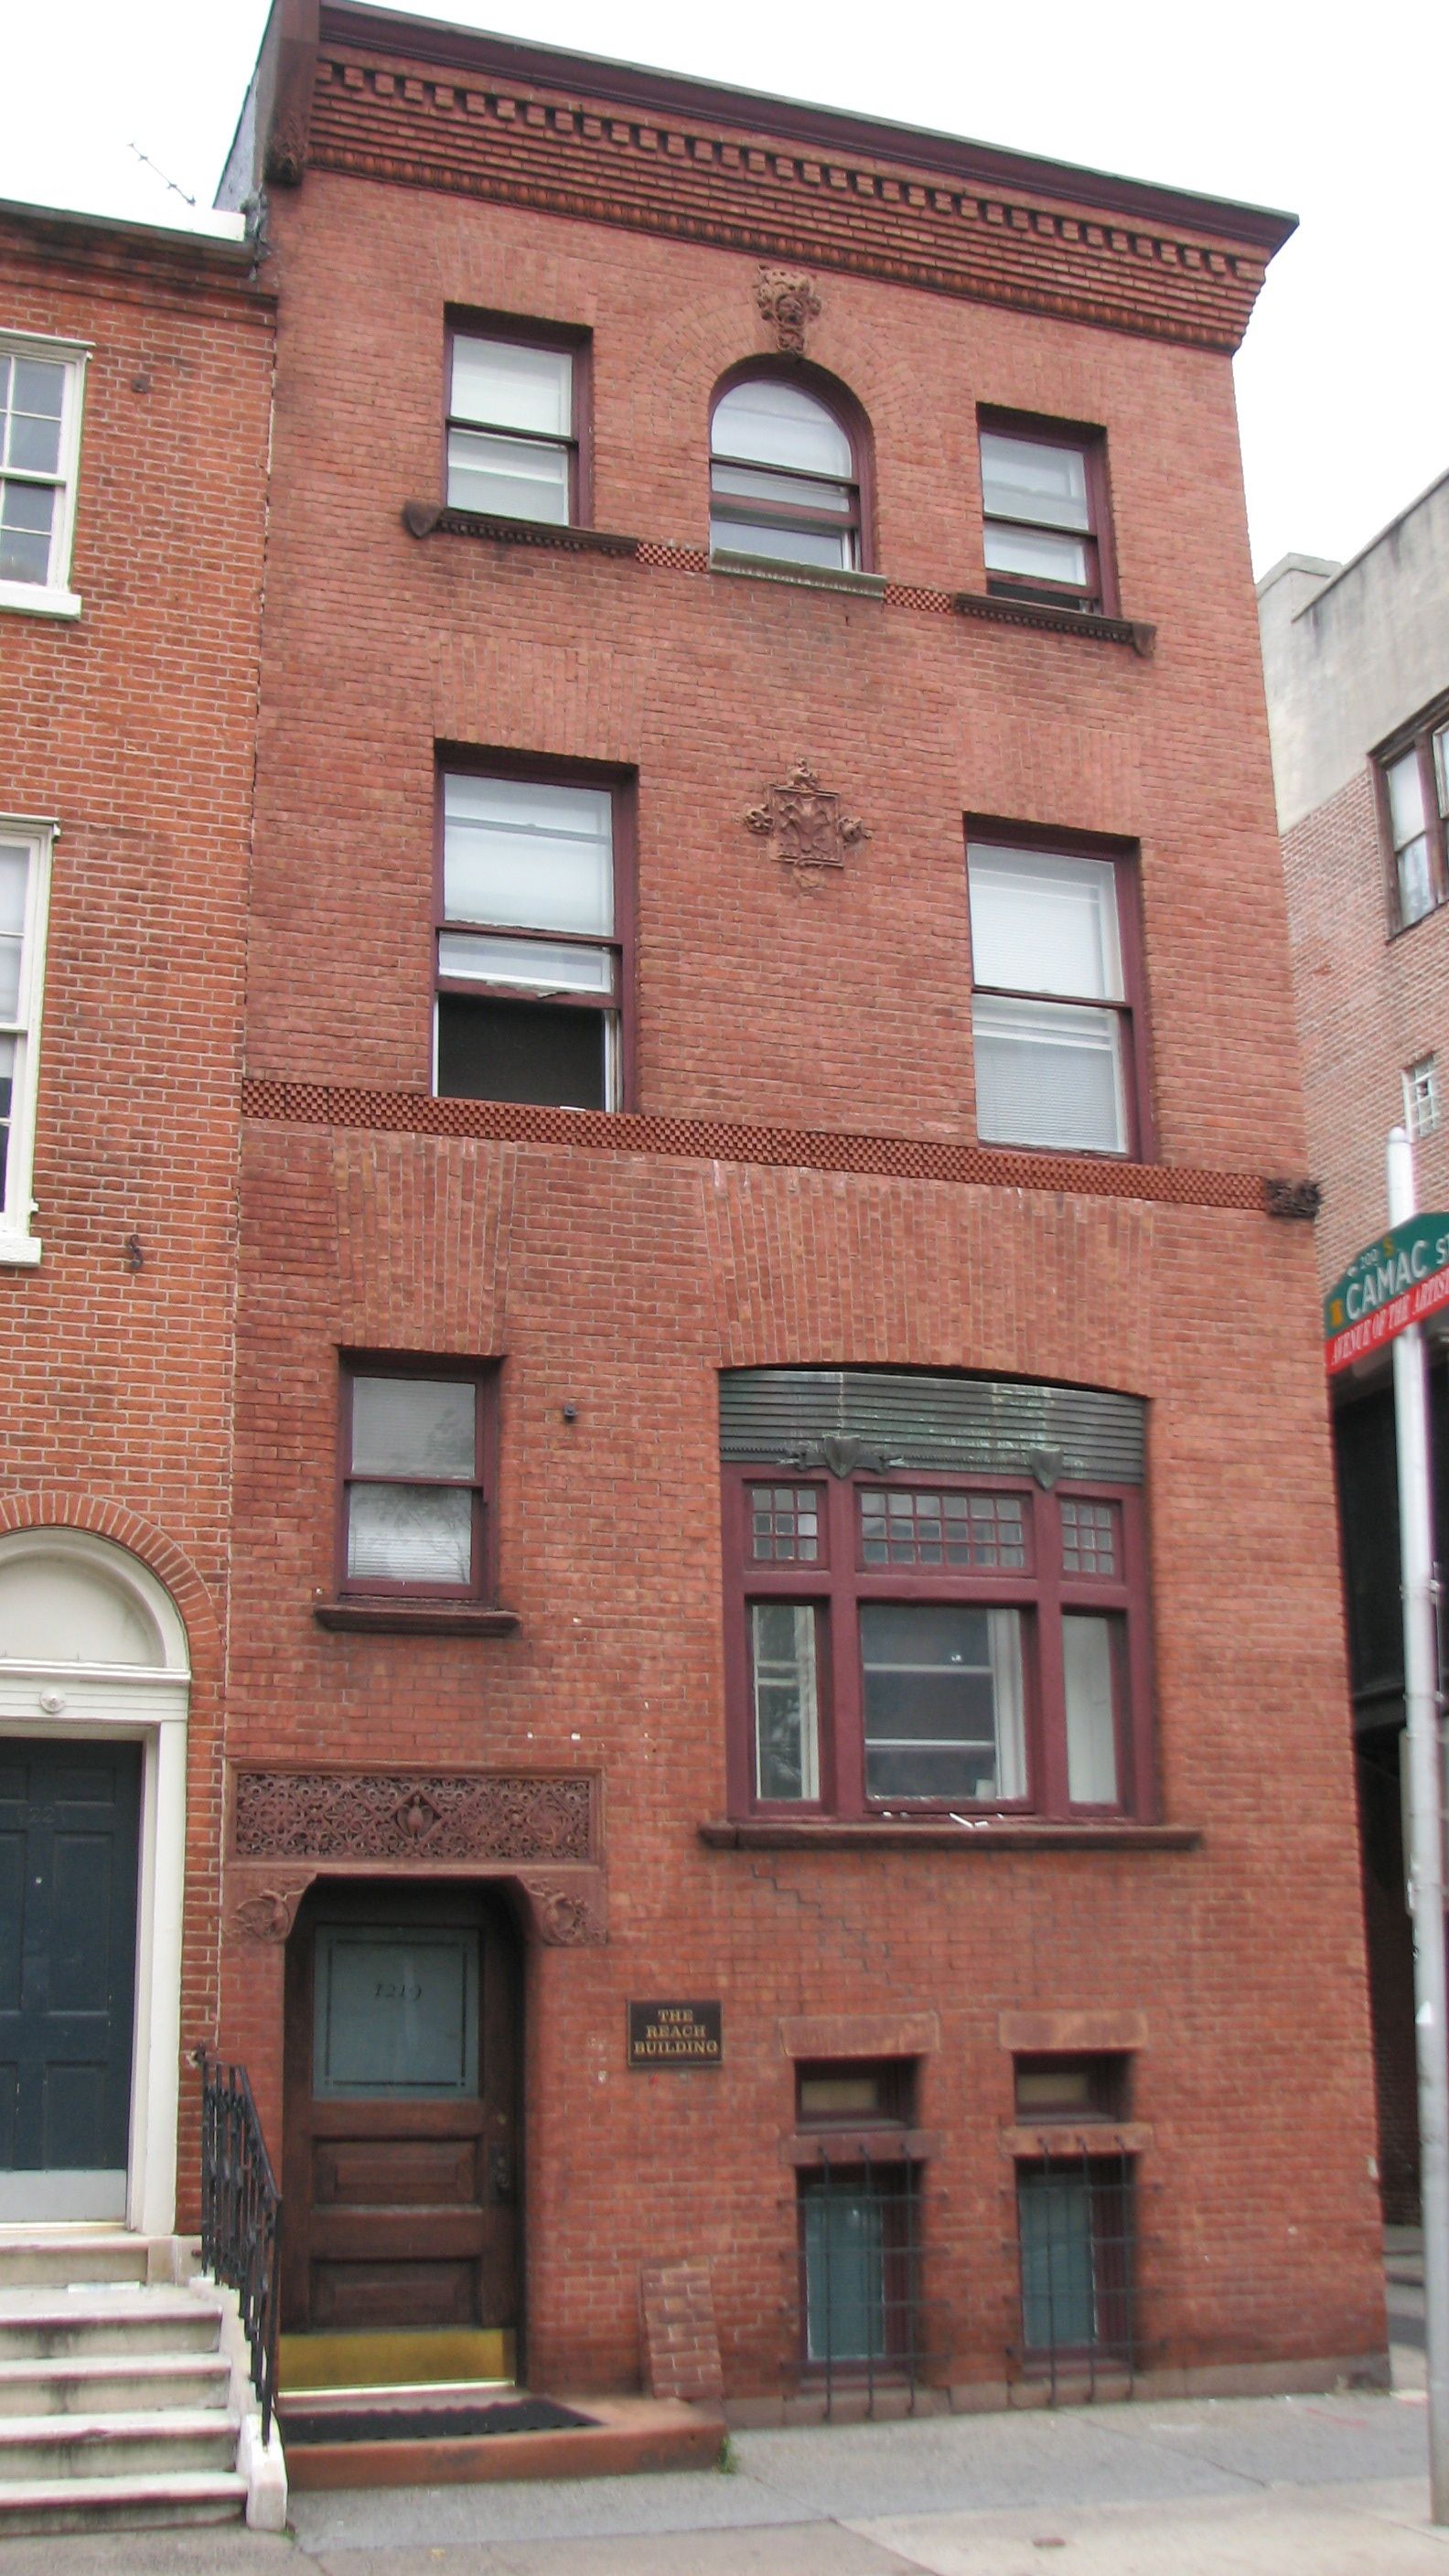 The Theodore M. Etting Residence, 1219 Spruce St., in Washington Square West